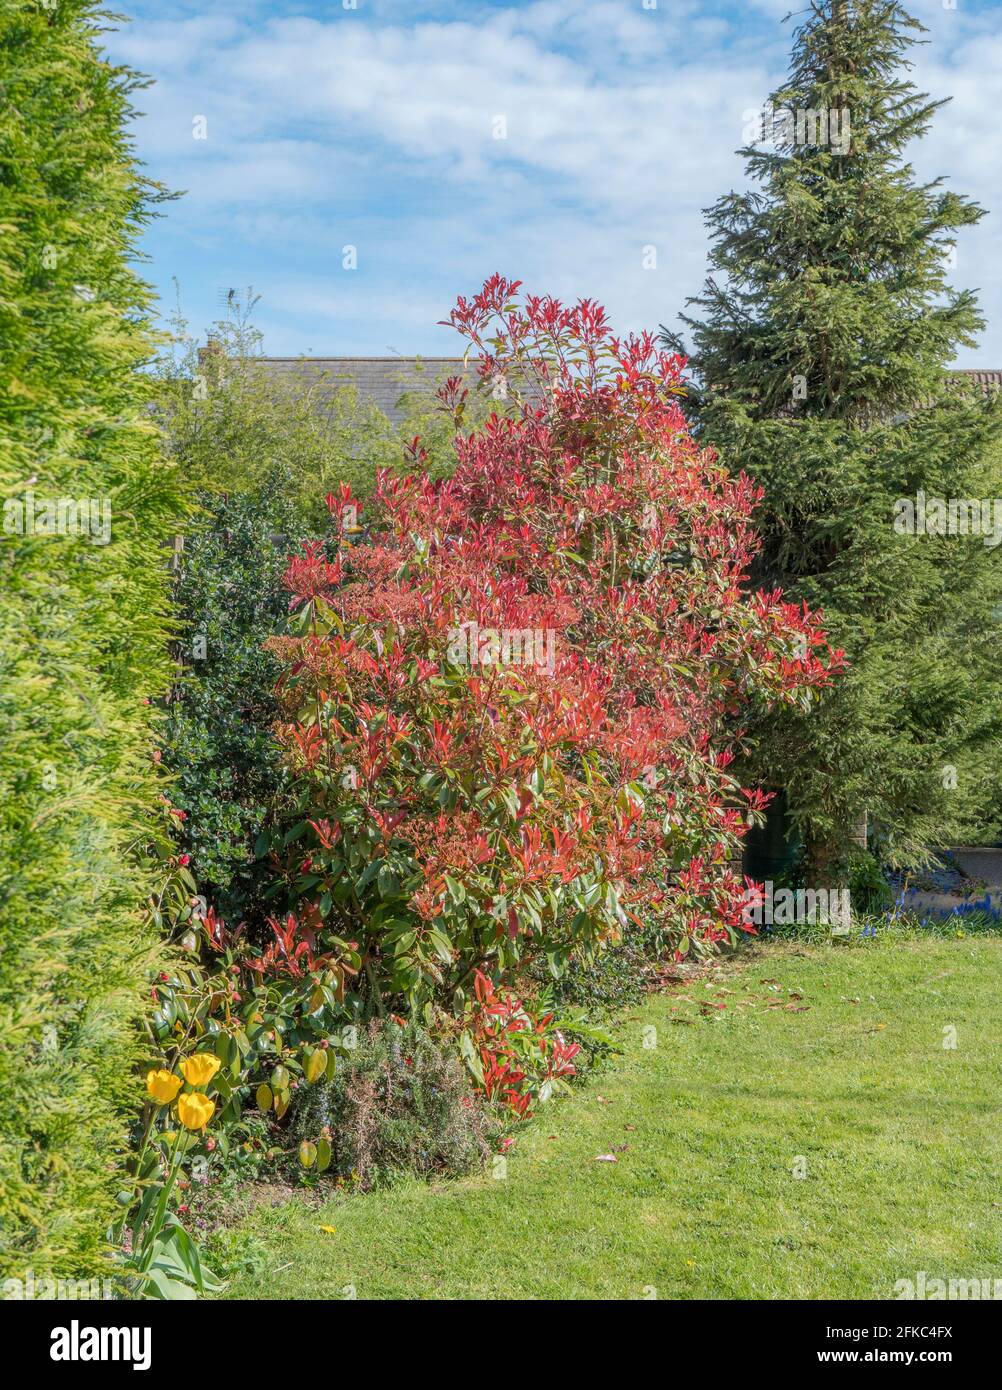 English garden in spring, with ‘Red Robin’ (Photinia fraseri) and ‘Pink Marble’ (Photinia cassini), pink and green bushes, next to a conifer fir tree. Stock Photo